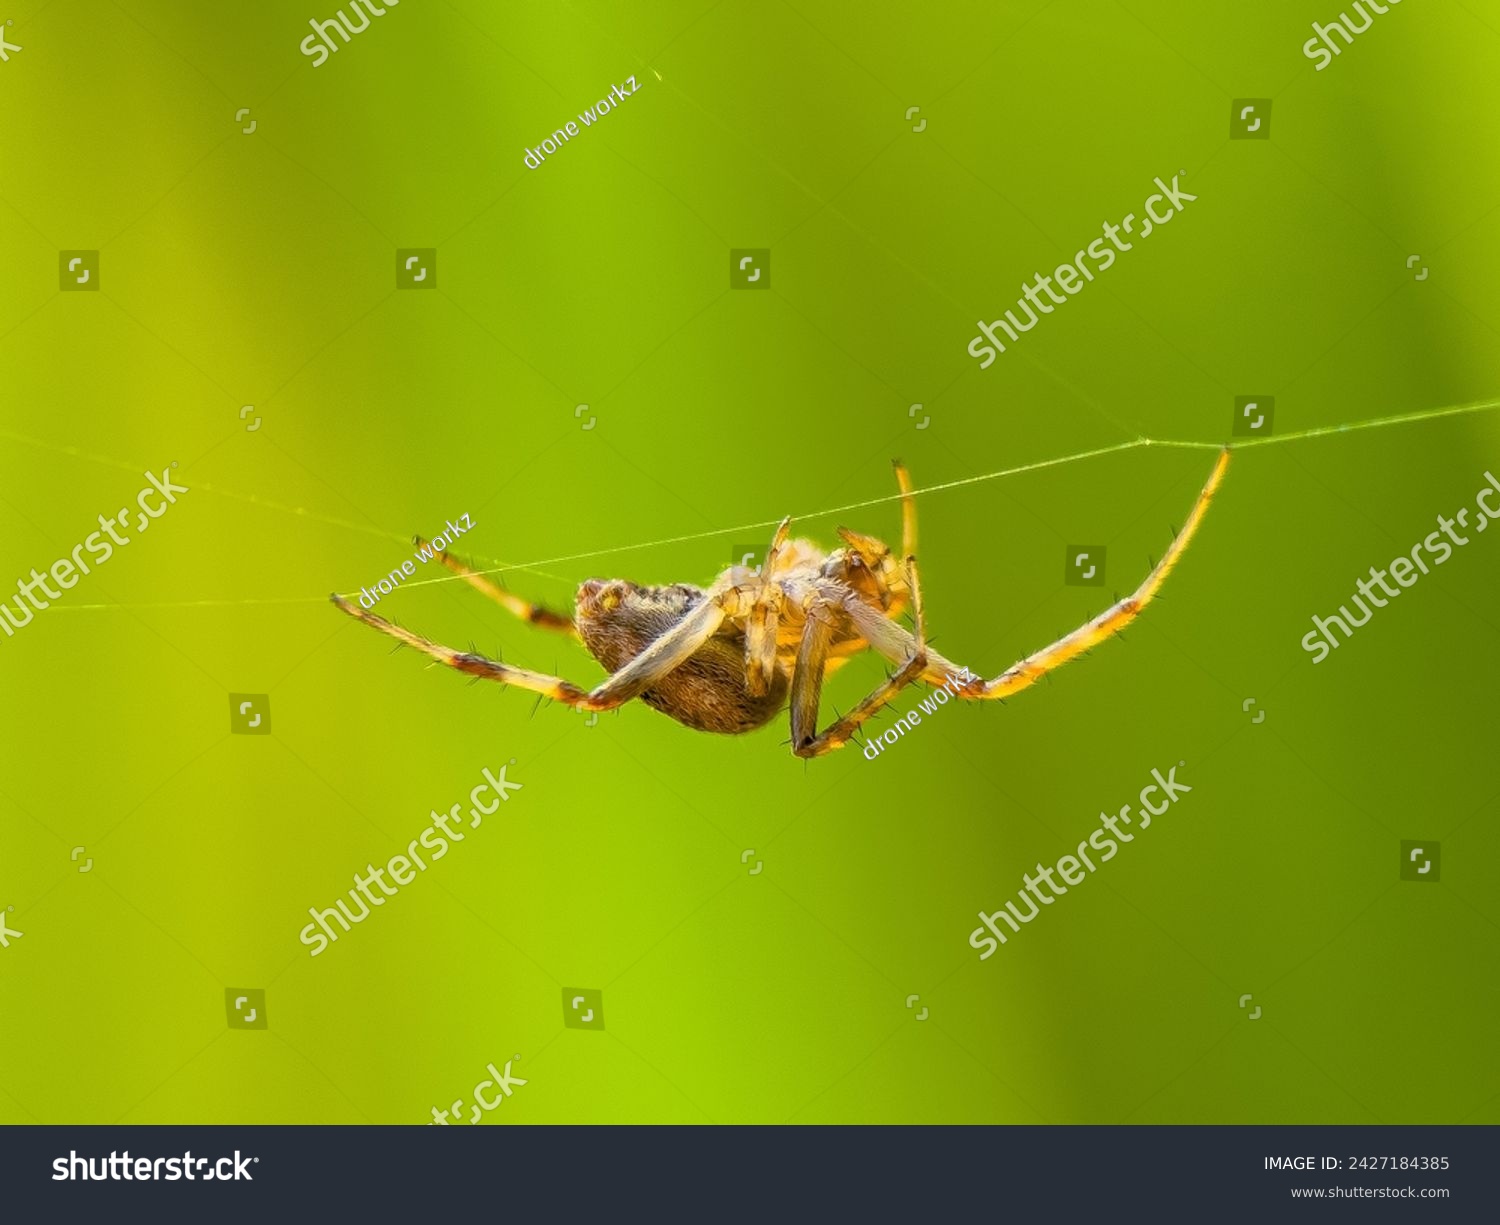 Translated from English-Neoscona, known as the spotted orb-weaver and barn spider, is a genus of orb-weaver spider that was first described by Eugène Simon in 1895 to separate it from other araneids i #2427184385